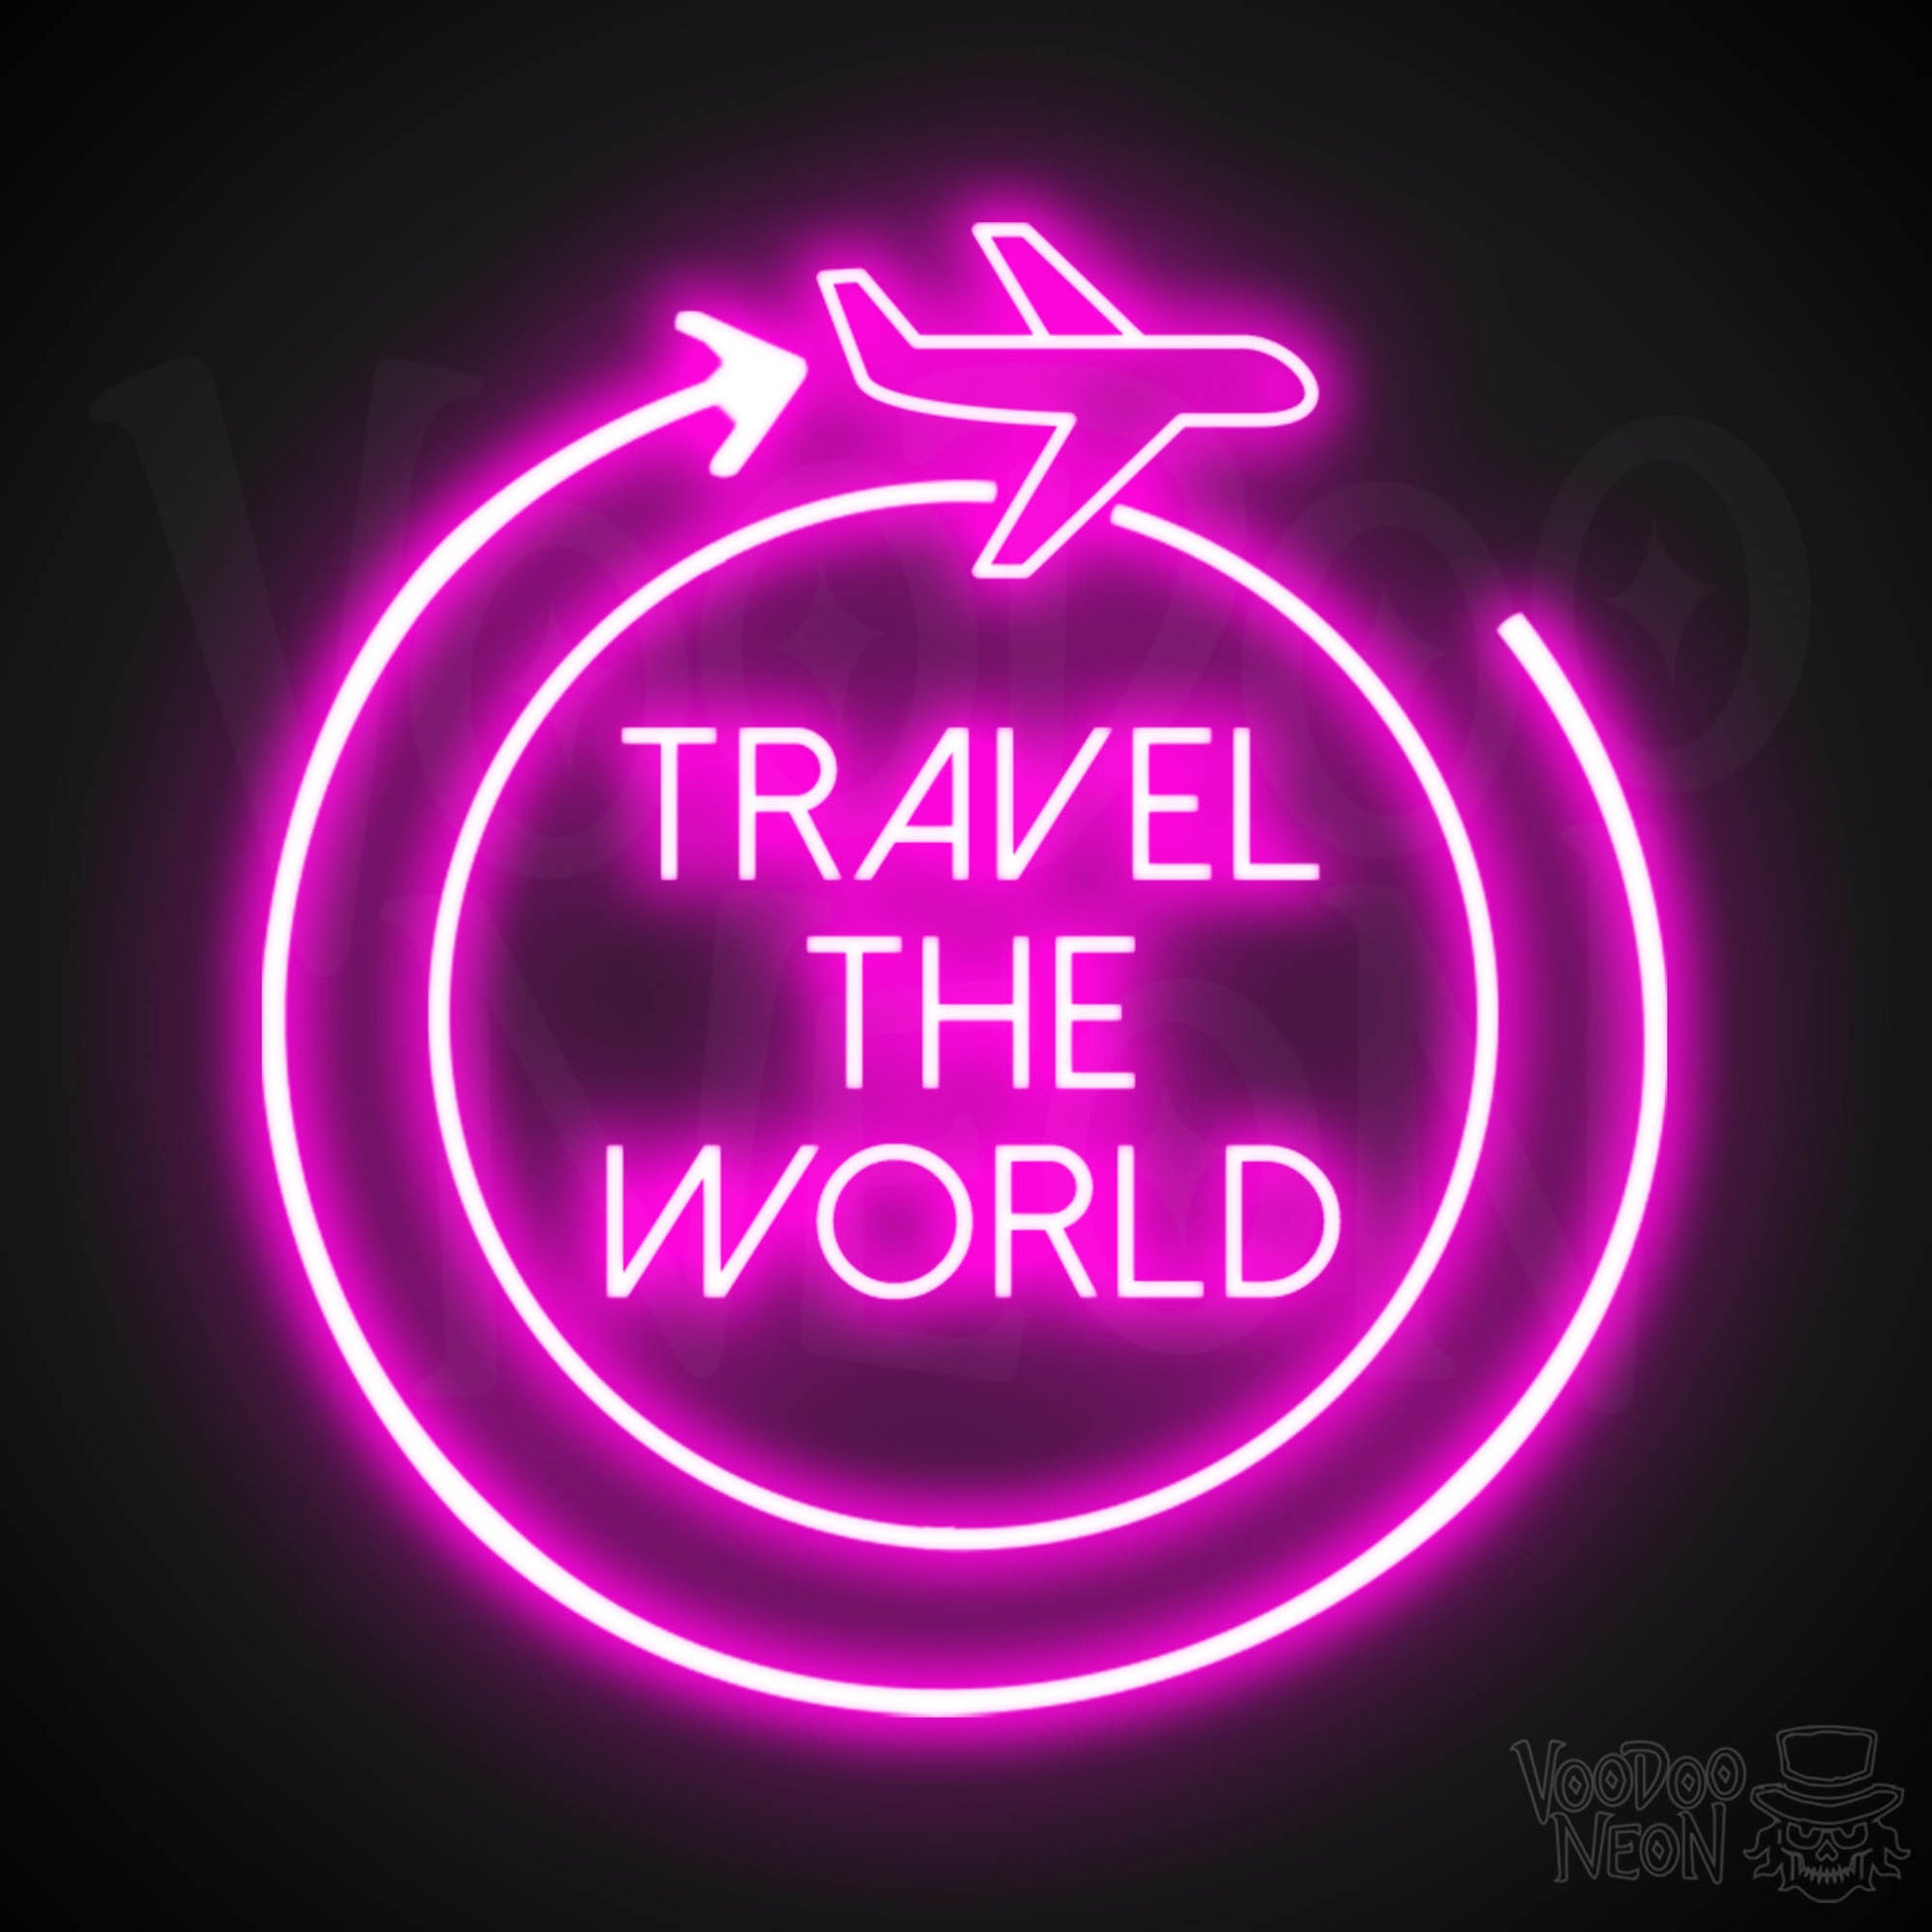 Let's Travel The World Neon Sign - LED Neon Wall Art - Color Pink